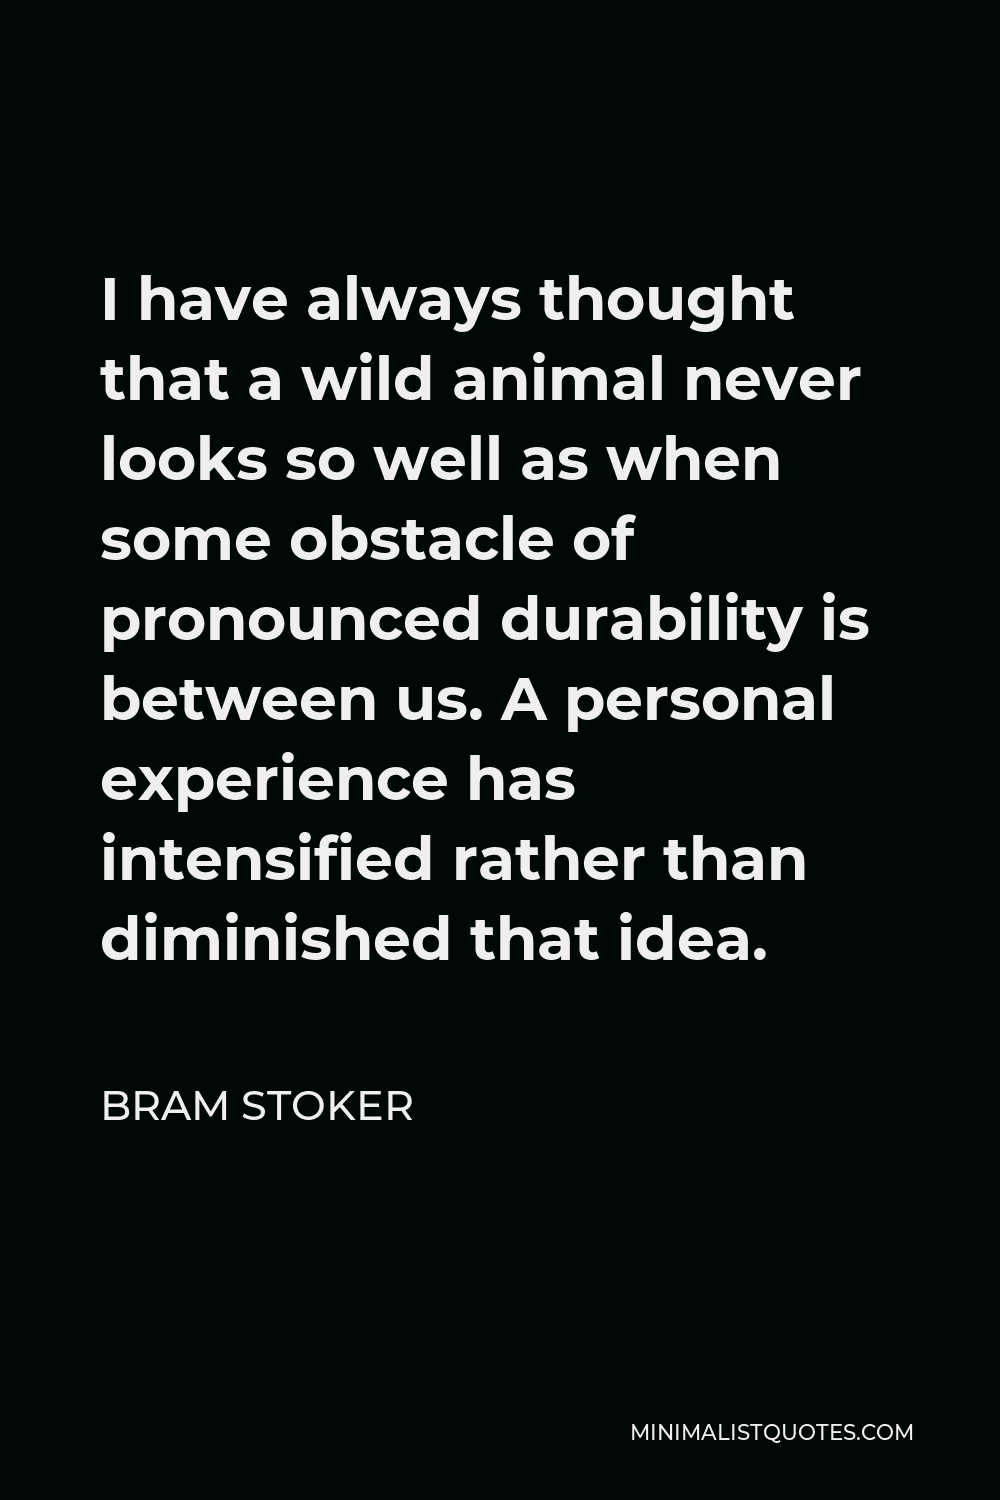 Bram Stoker Quote - I have always thought that a wild animal never looks so well as when some obstacle of pronounced durability is between us. A personal experience has intensified rather than diminished that idea.